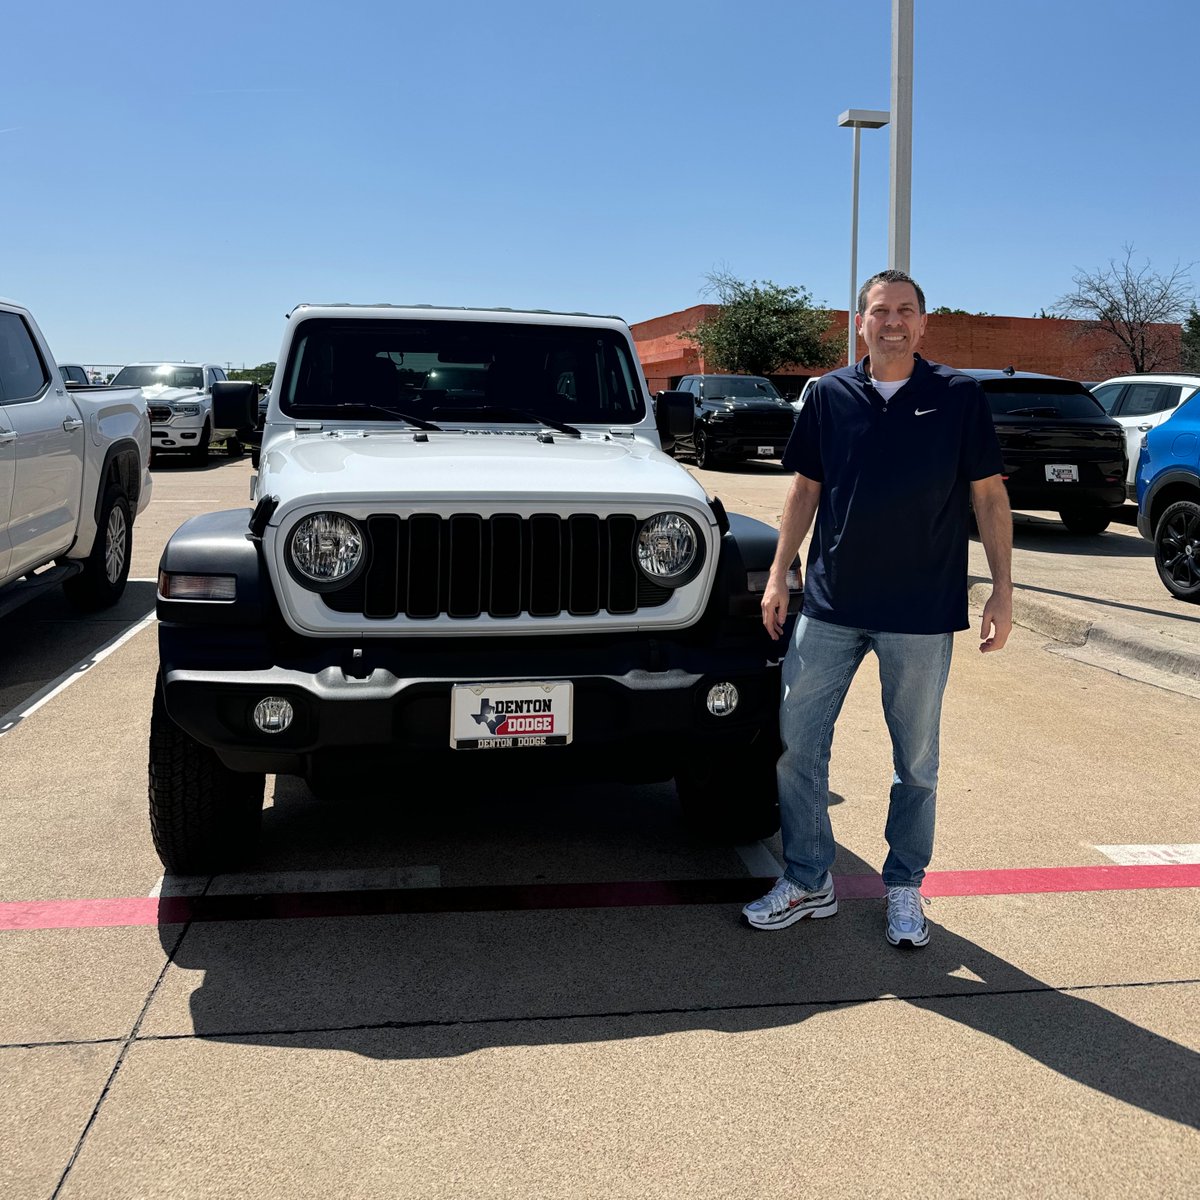 🎉 Way to go, Paul! We appreciate your business. Enjoy your new Jeep from Eric. #JeepFam #DentonDodge